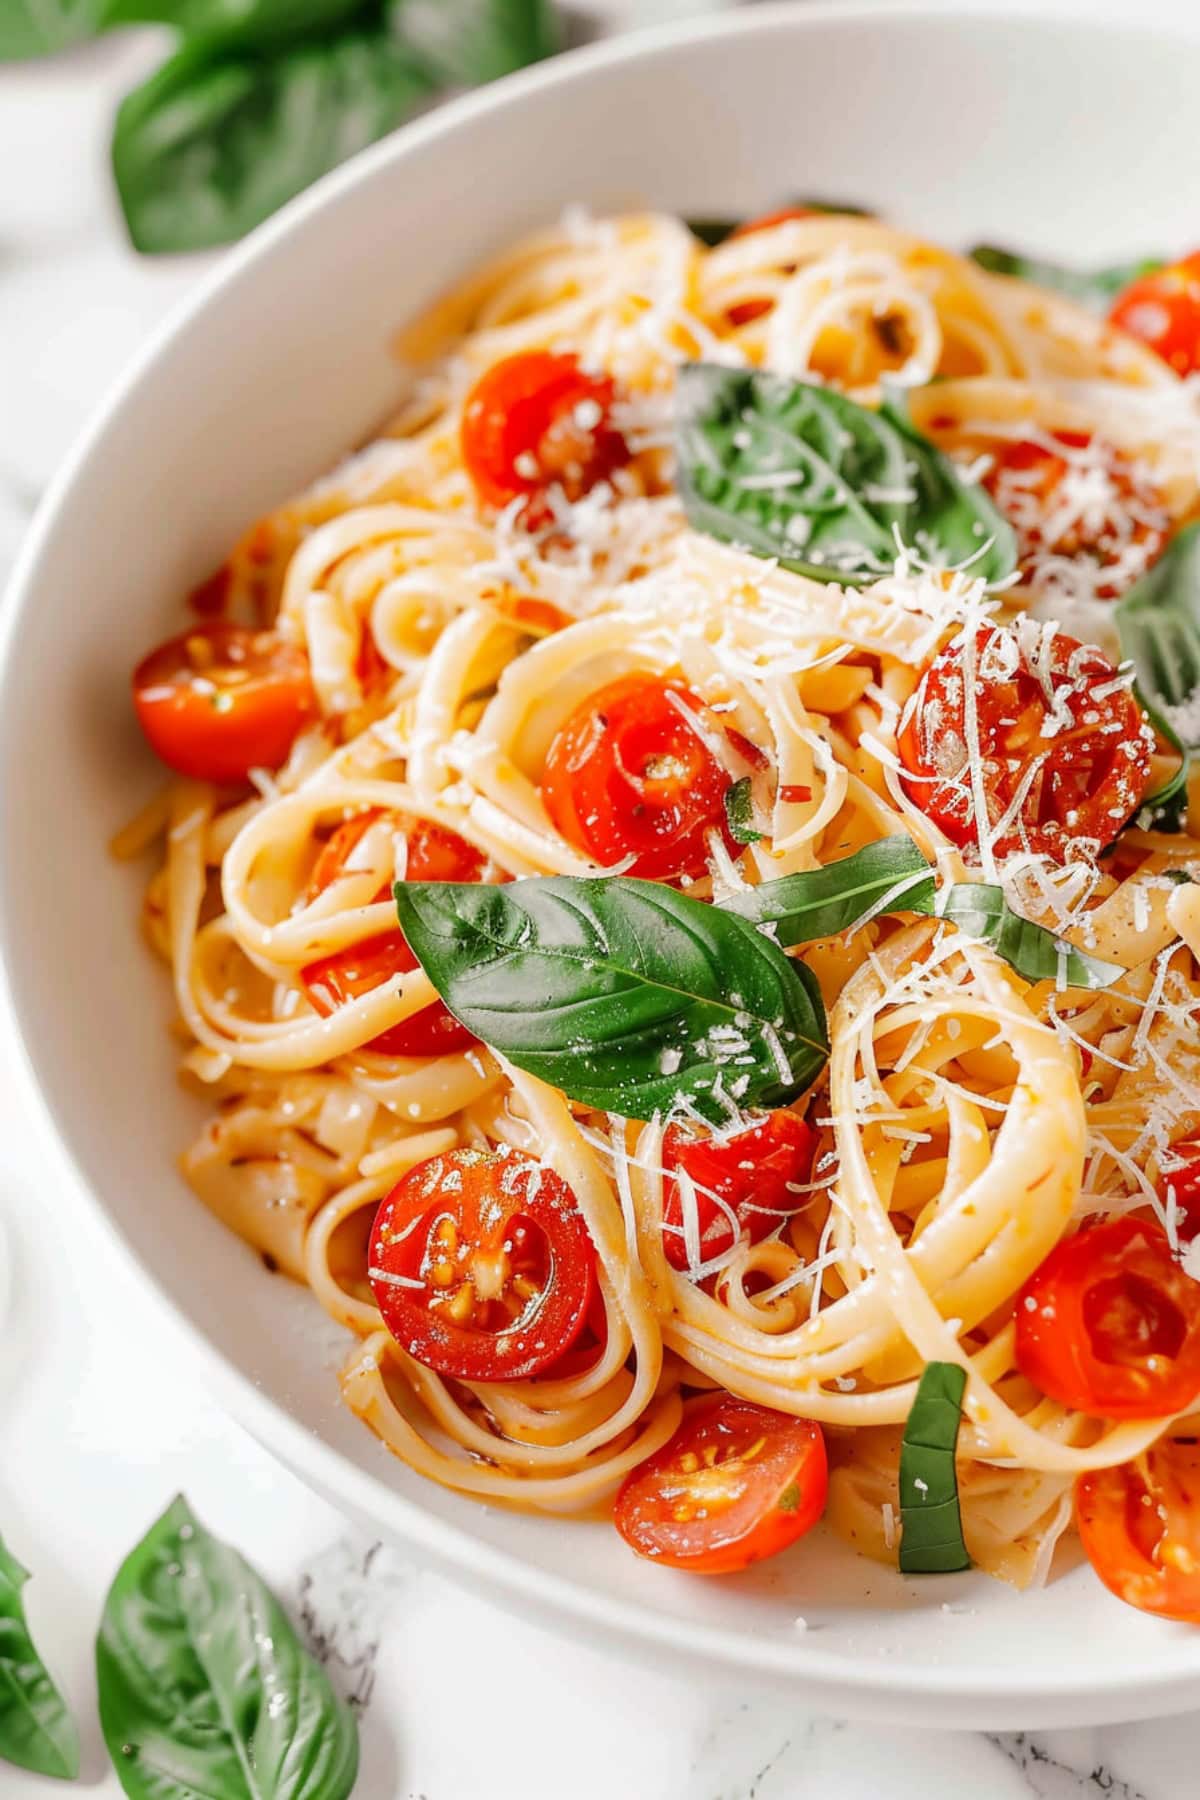 A summery pasta salad with cherry tomatoes and basil, sprinkled with black pepper and Parmesan.